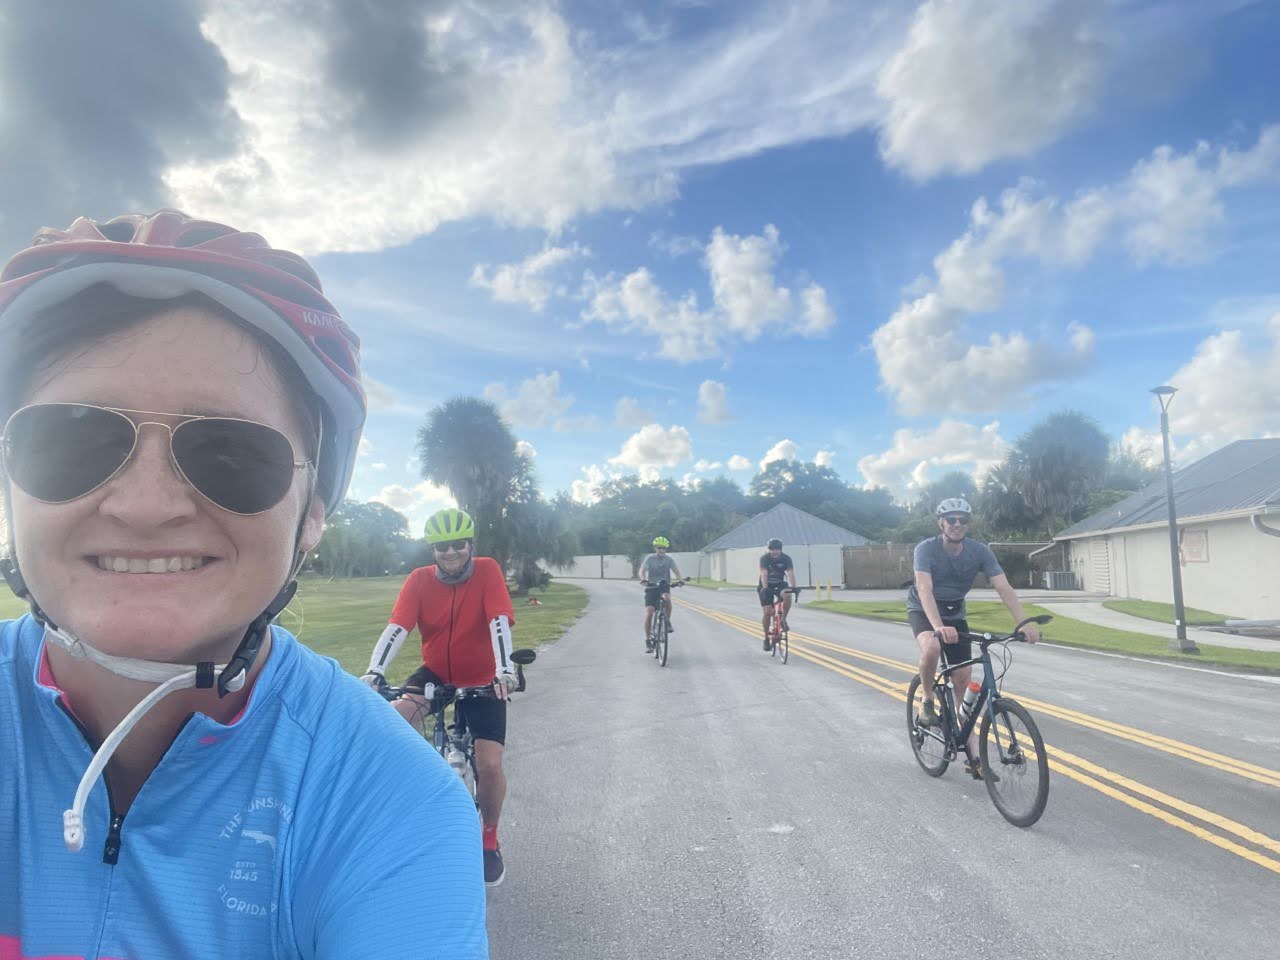 A woman takes a selfie while riding a road bike. 3 other bike riders are in the background on a sunny day.